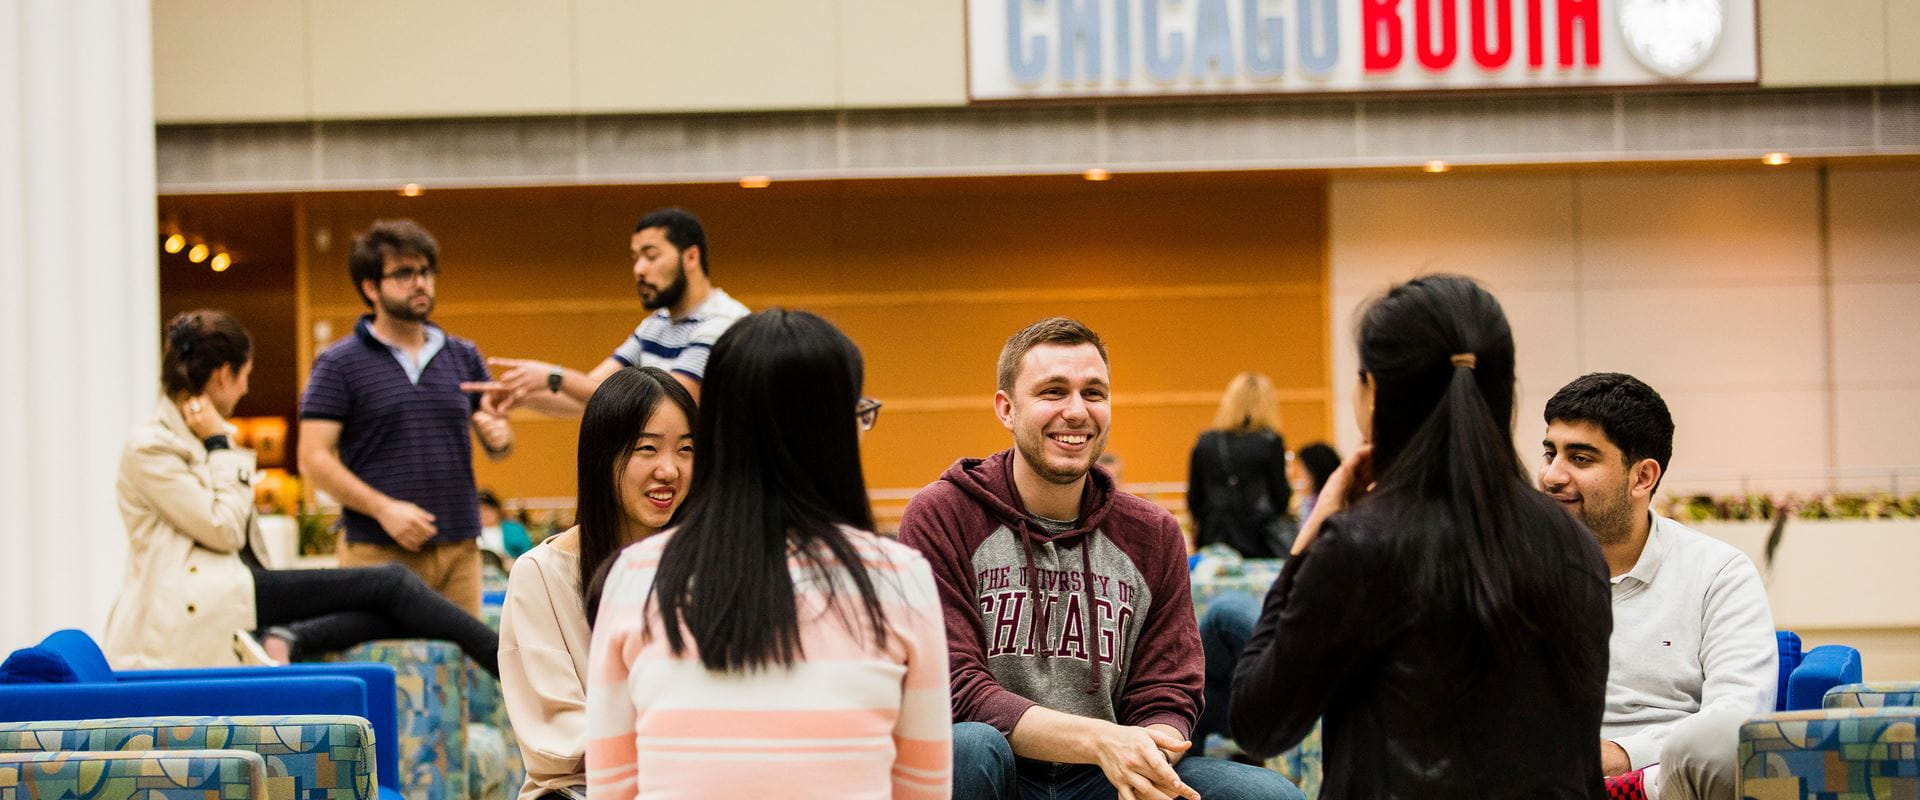 A Day in the Life of a Chicago Booth Student